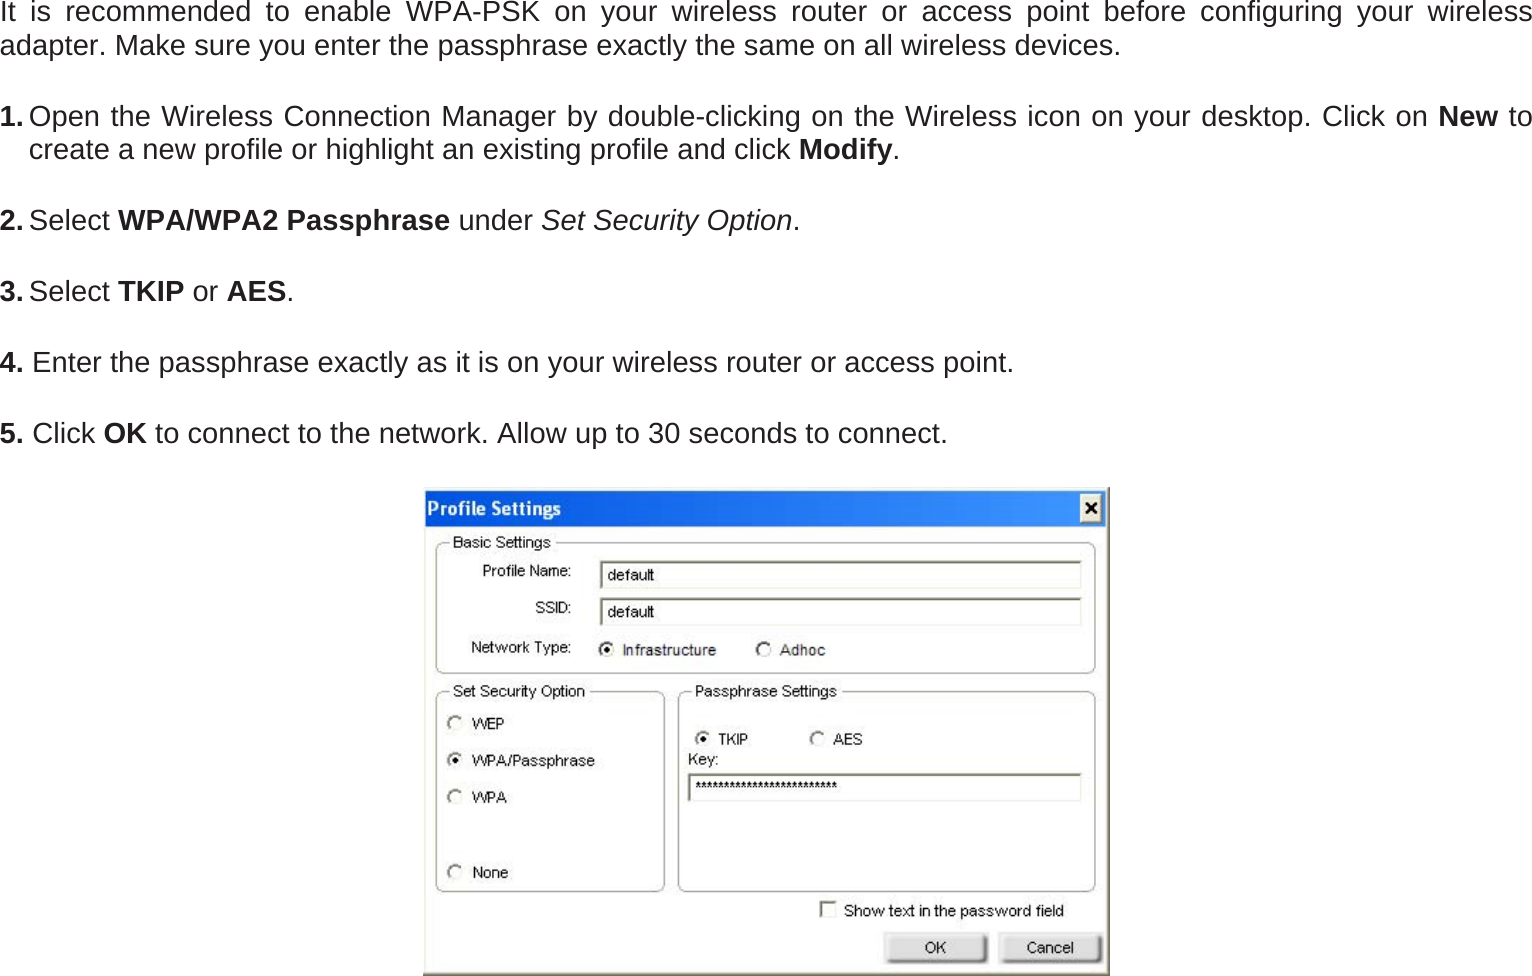 It is recommended to enable WPA-PSK on your wireless router or access point before configuring your wireless adapter. Make sure you enter the passphrase exactly the same on all wireless devices. 1. Open the Wireless Connection Manager by double-clicking on the Wireless icon on your desktop. Click on New to create a new profile or highlight an existing profile and click Modify.  2. Select WPA/WPA2 Passphrase under Set Security Option. 3. Select TKIP or AES.  4. Enter the passphrase exactly as it is on your wireless router or access point. 5. Click OK to connect to the network. Allow up to 30 seconds to connect.  